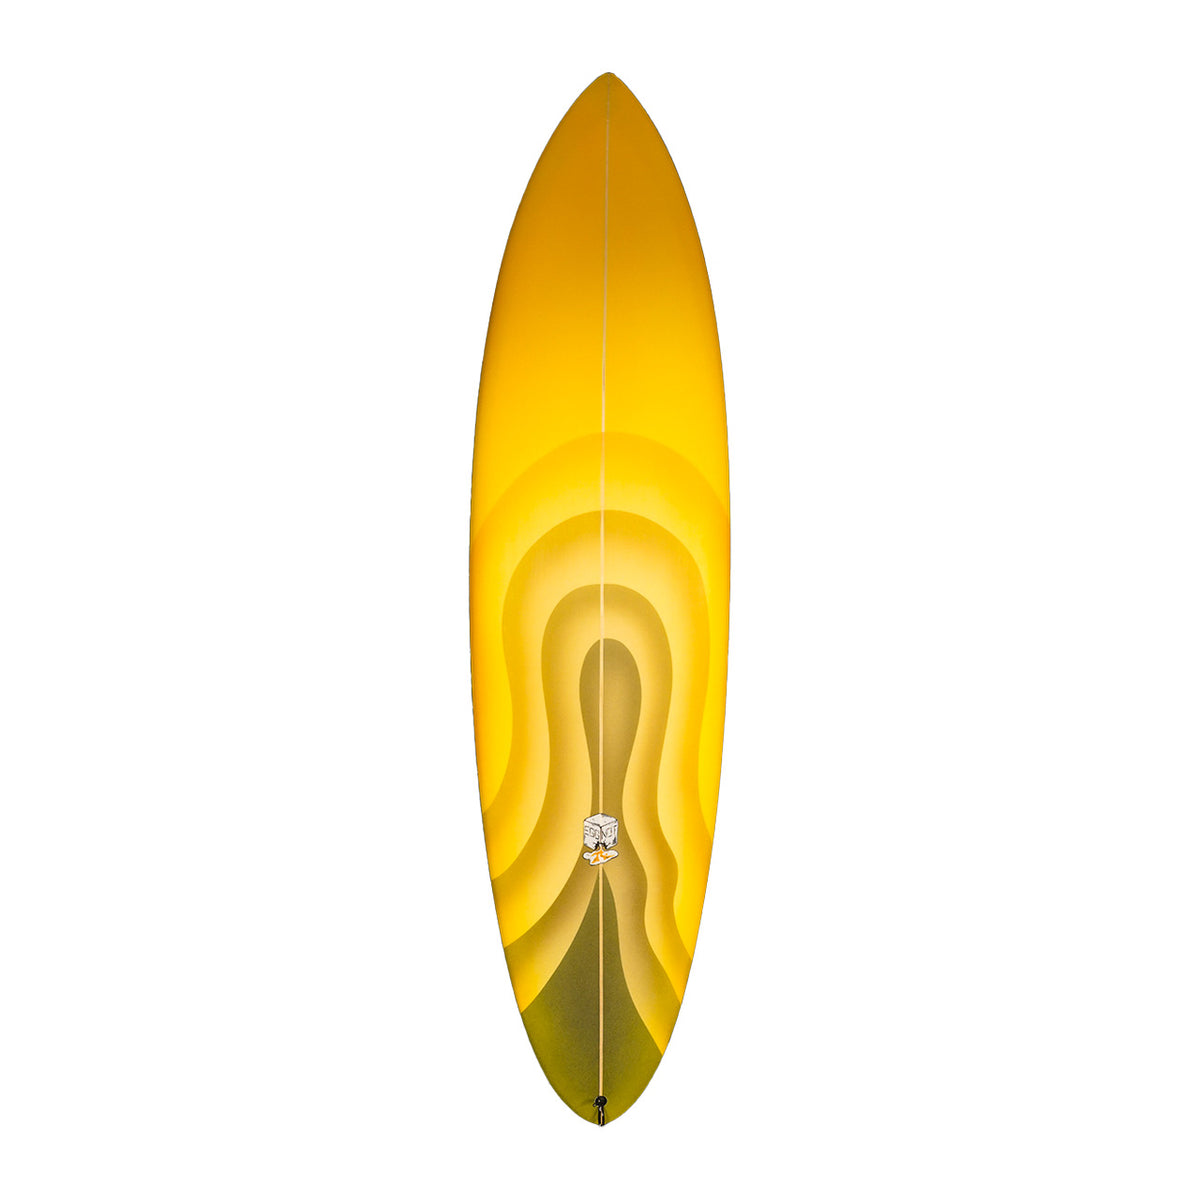 Egg Not Mid Length Surfboard - Rusty Surfboards - Thumb Tail and Special Spray